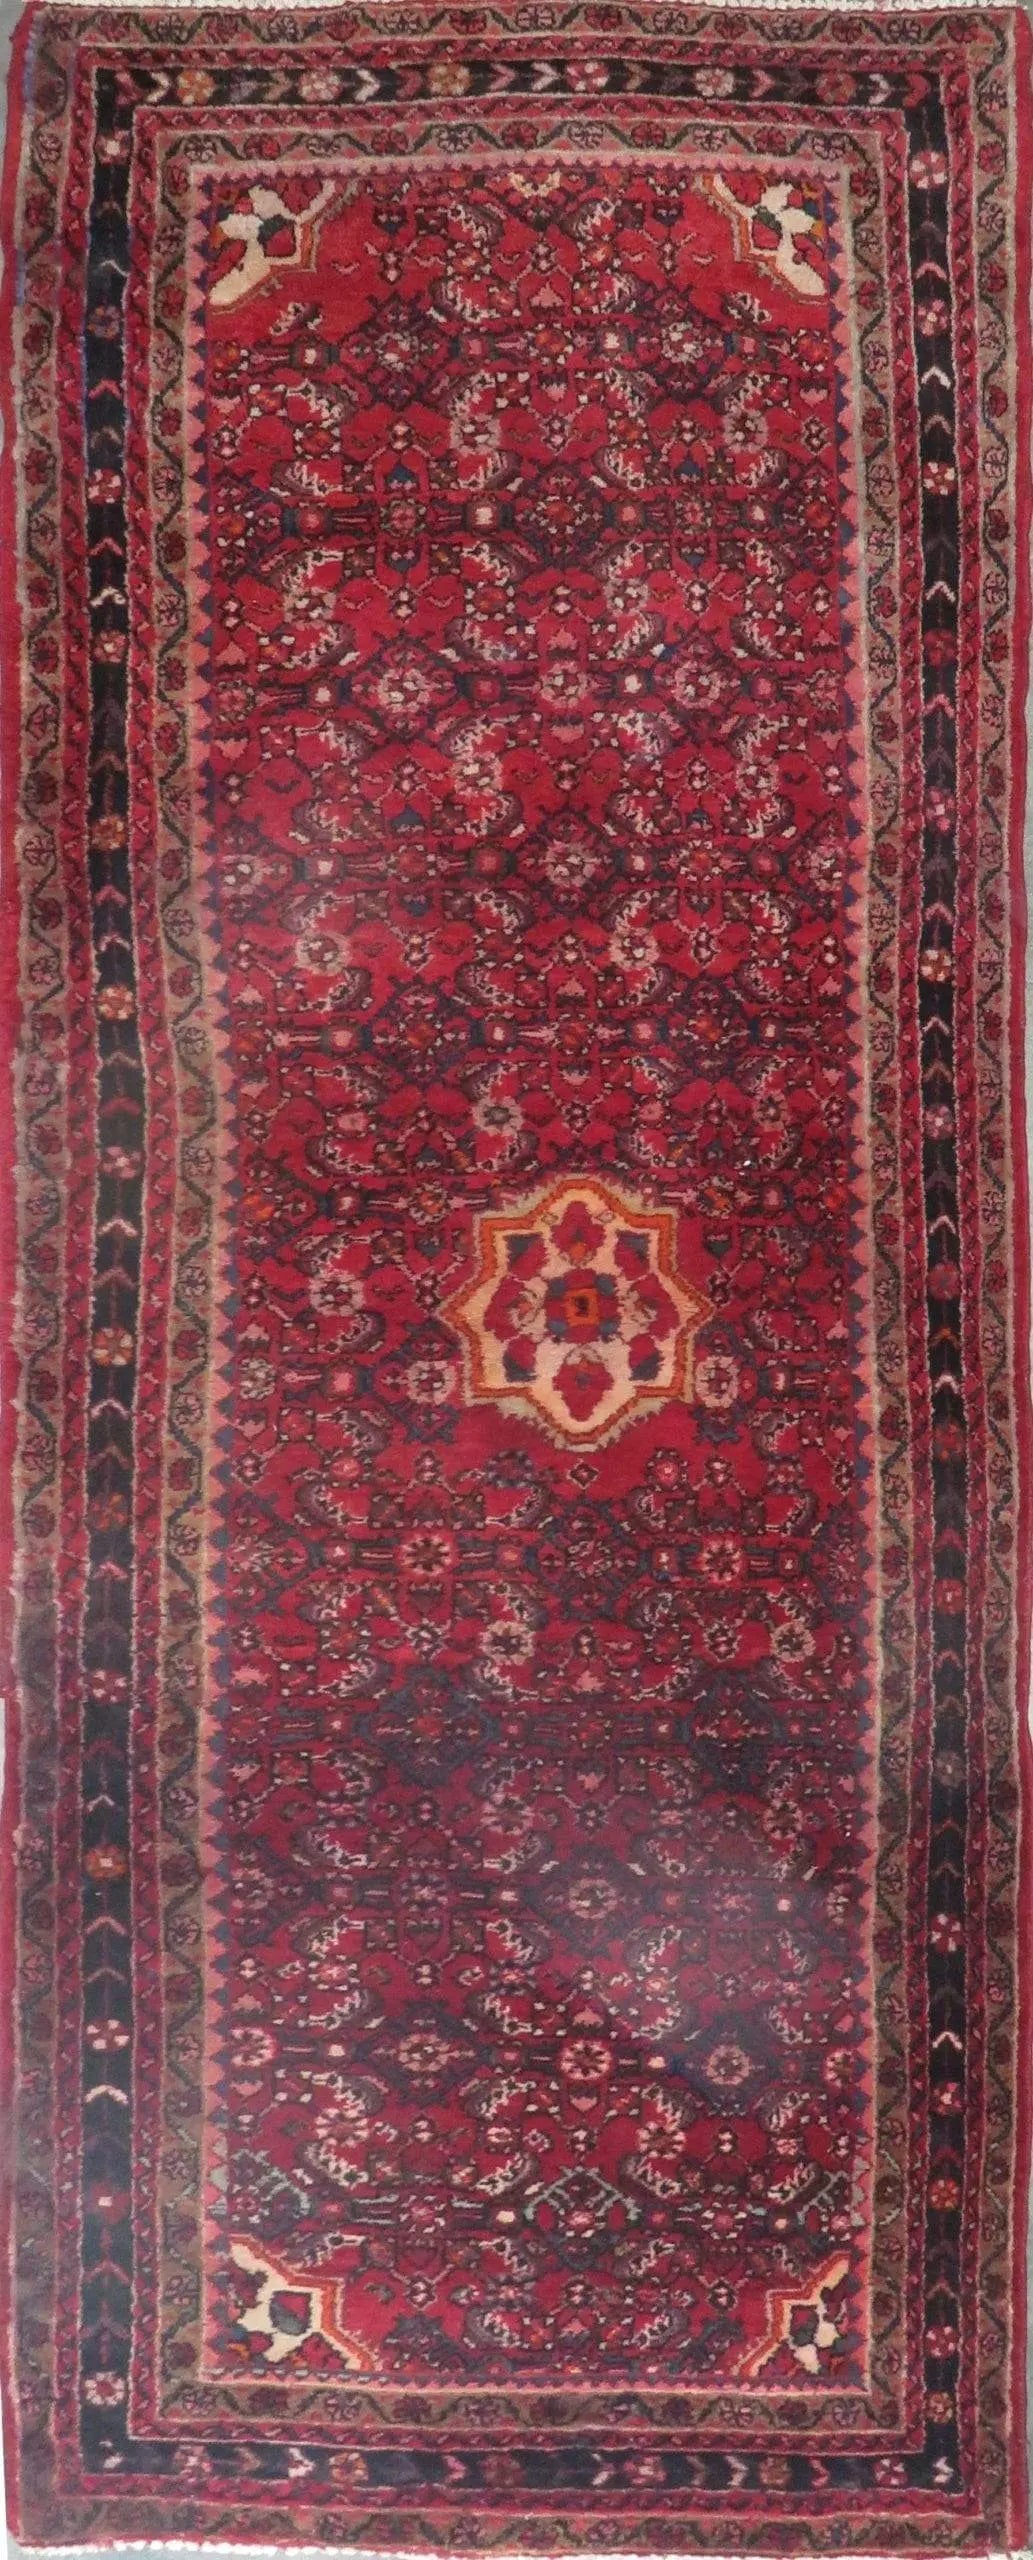 Hand-Knotted Persian Wool Rug _ Luxurious Vintage Design, 10'2" x 3'7", Artisan Crafted